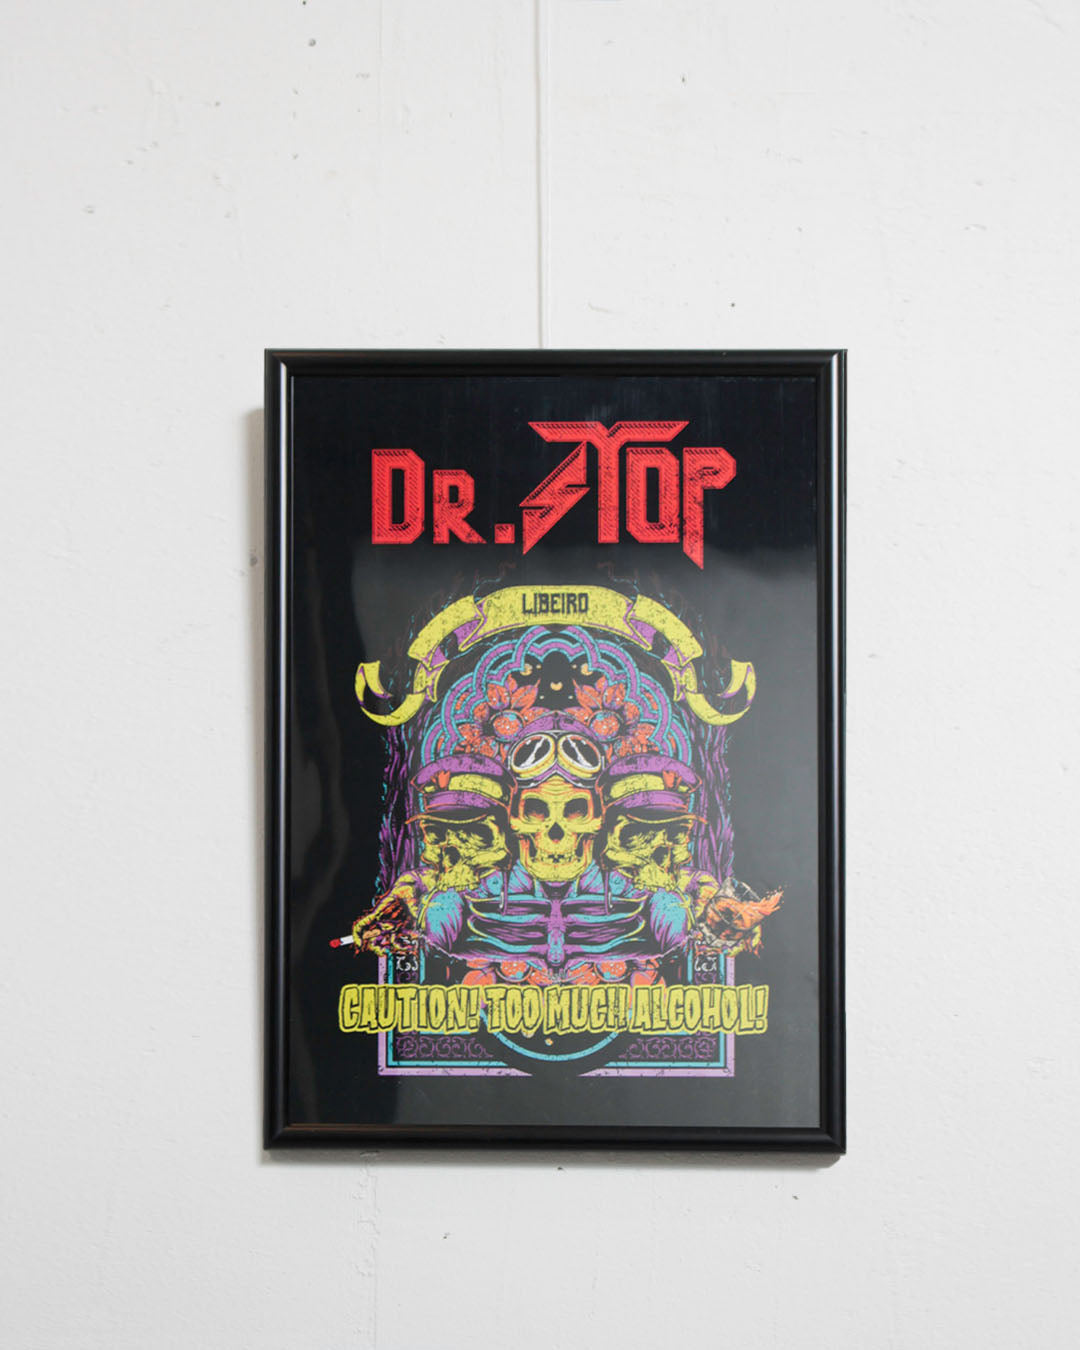 LIBEIRO gallery "Dr.STOP" Scull